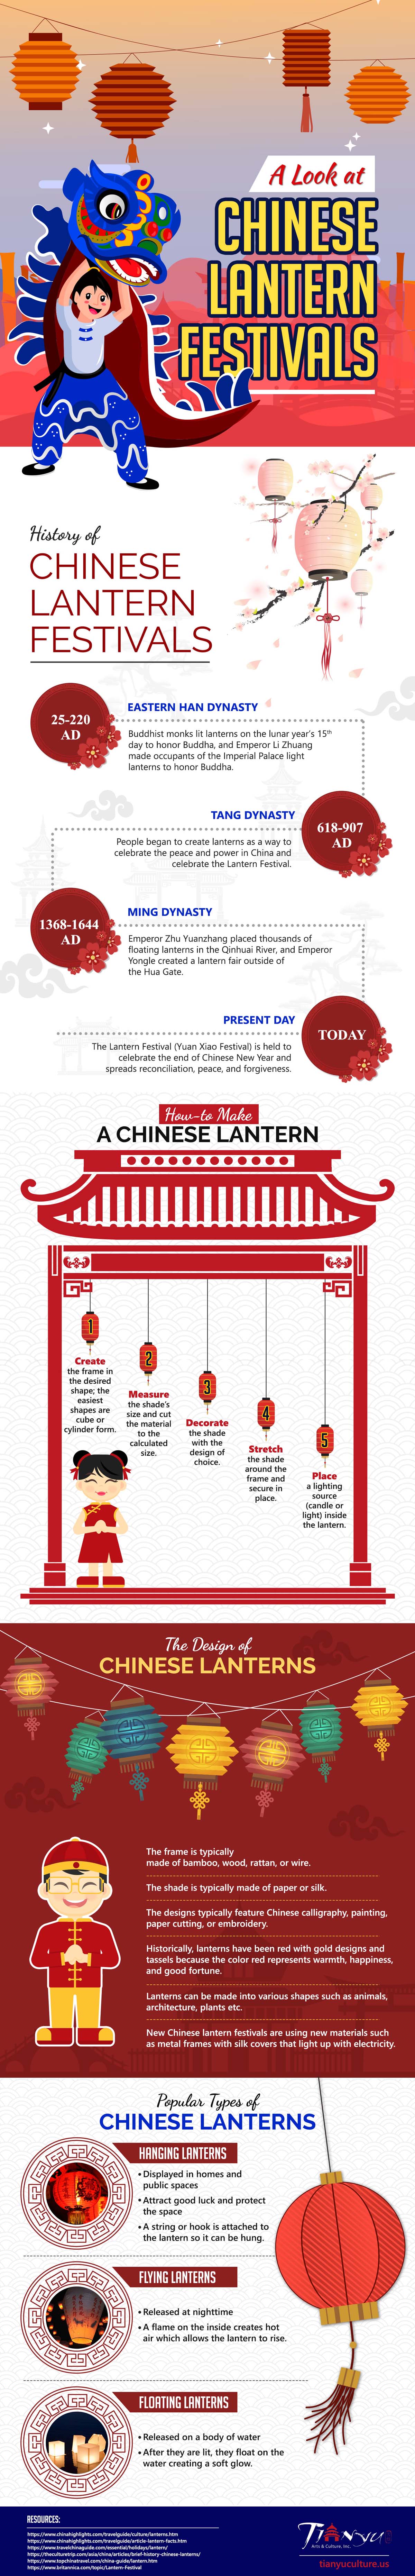 A Look at Chinese Lantern Festivals